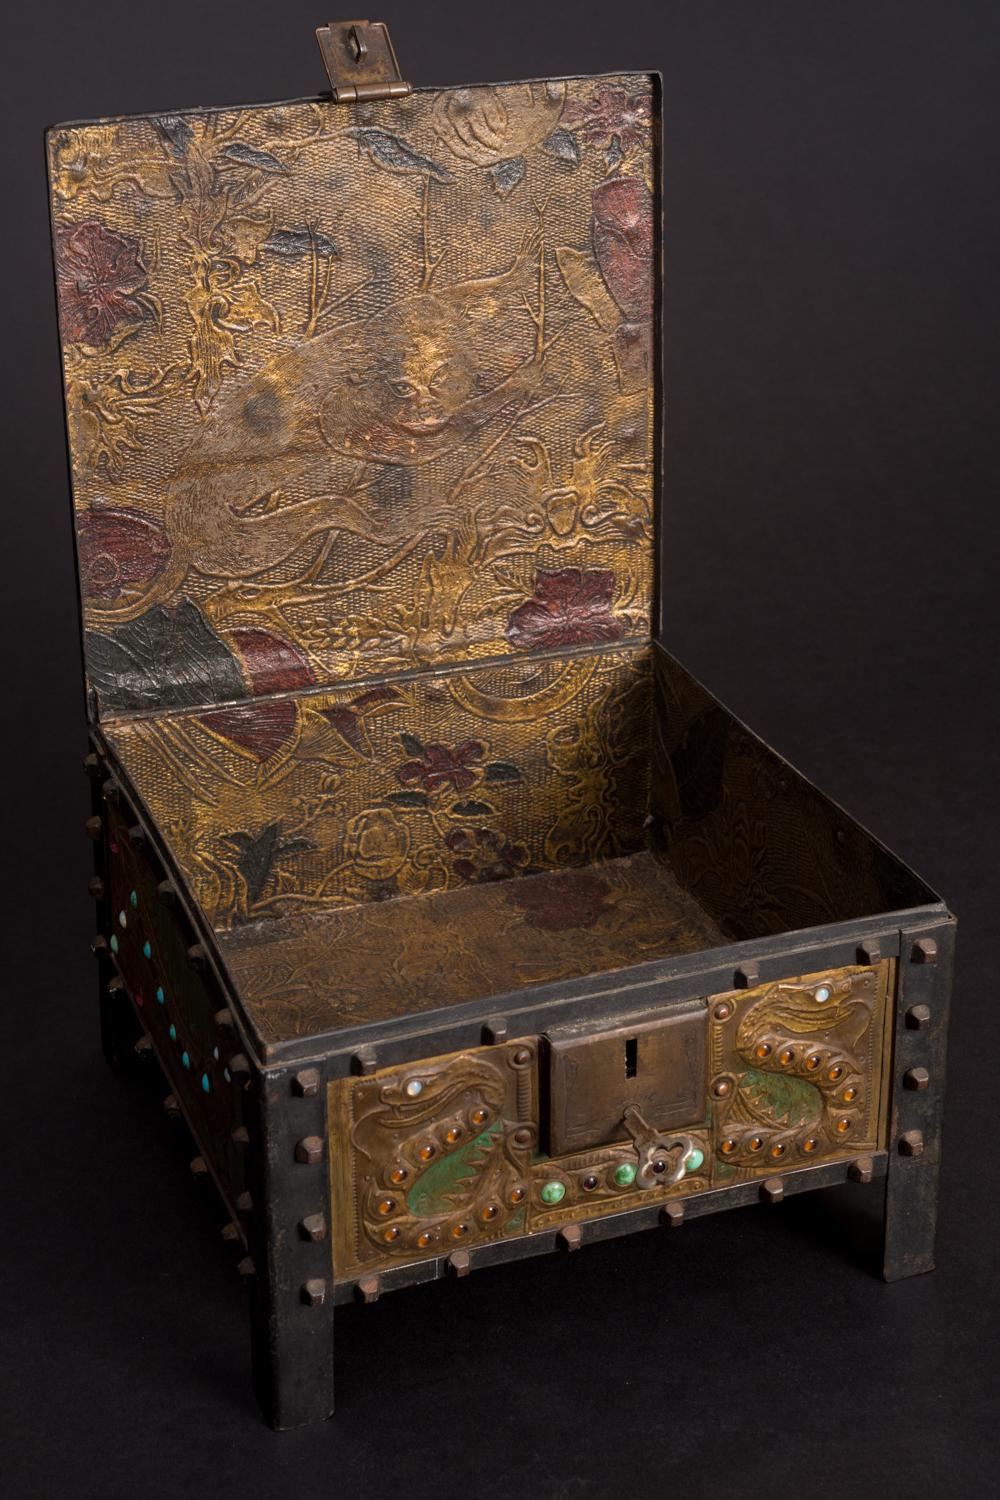 VIPER BOX, by Alfred Daguet (French, 1875-1942), dated 1907; an iron footed box whose prominent square nail heads lining the sides and its locking mechanism make up a Medieval design aesthetic, fitted with brass panels decorated in repoussé, painted